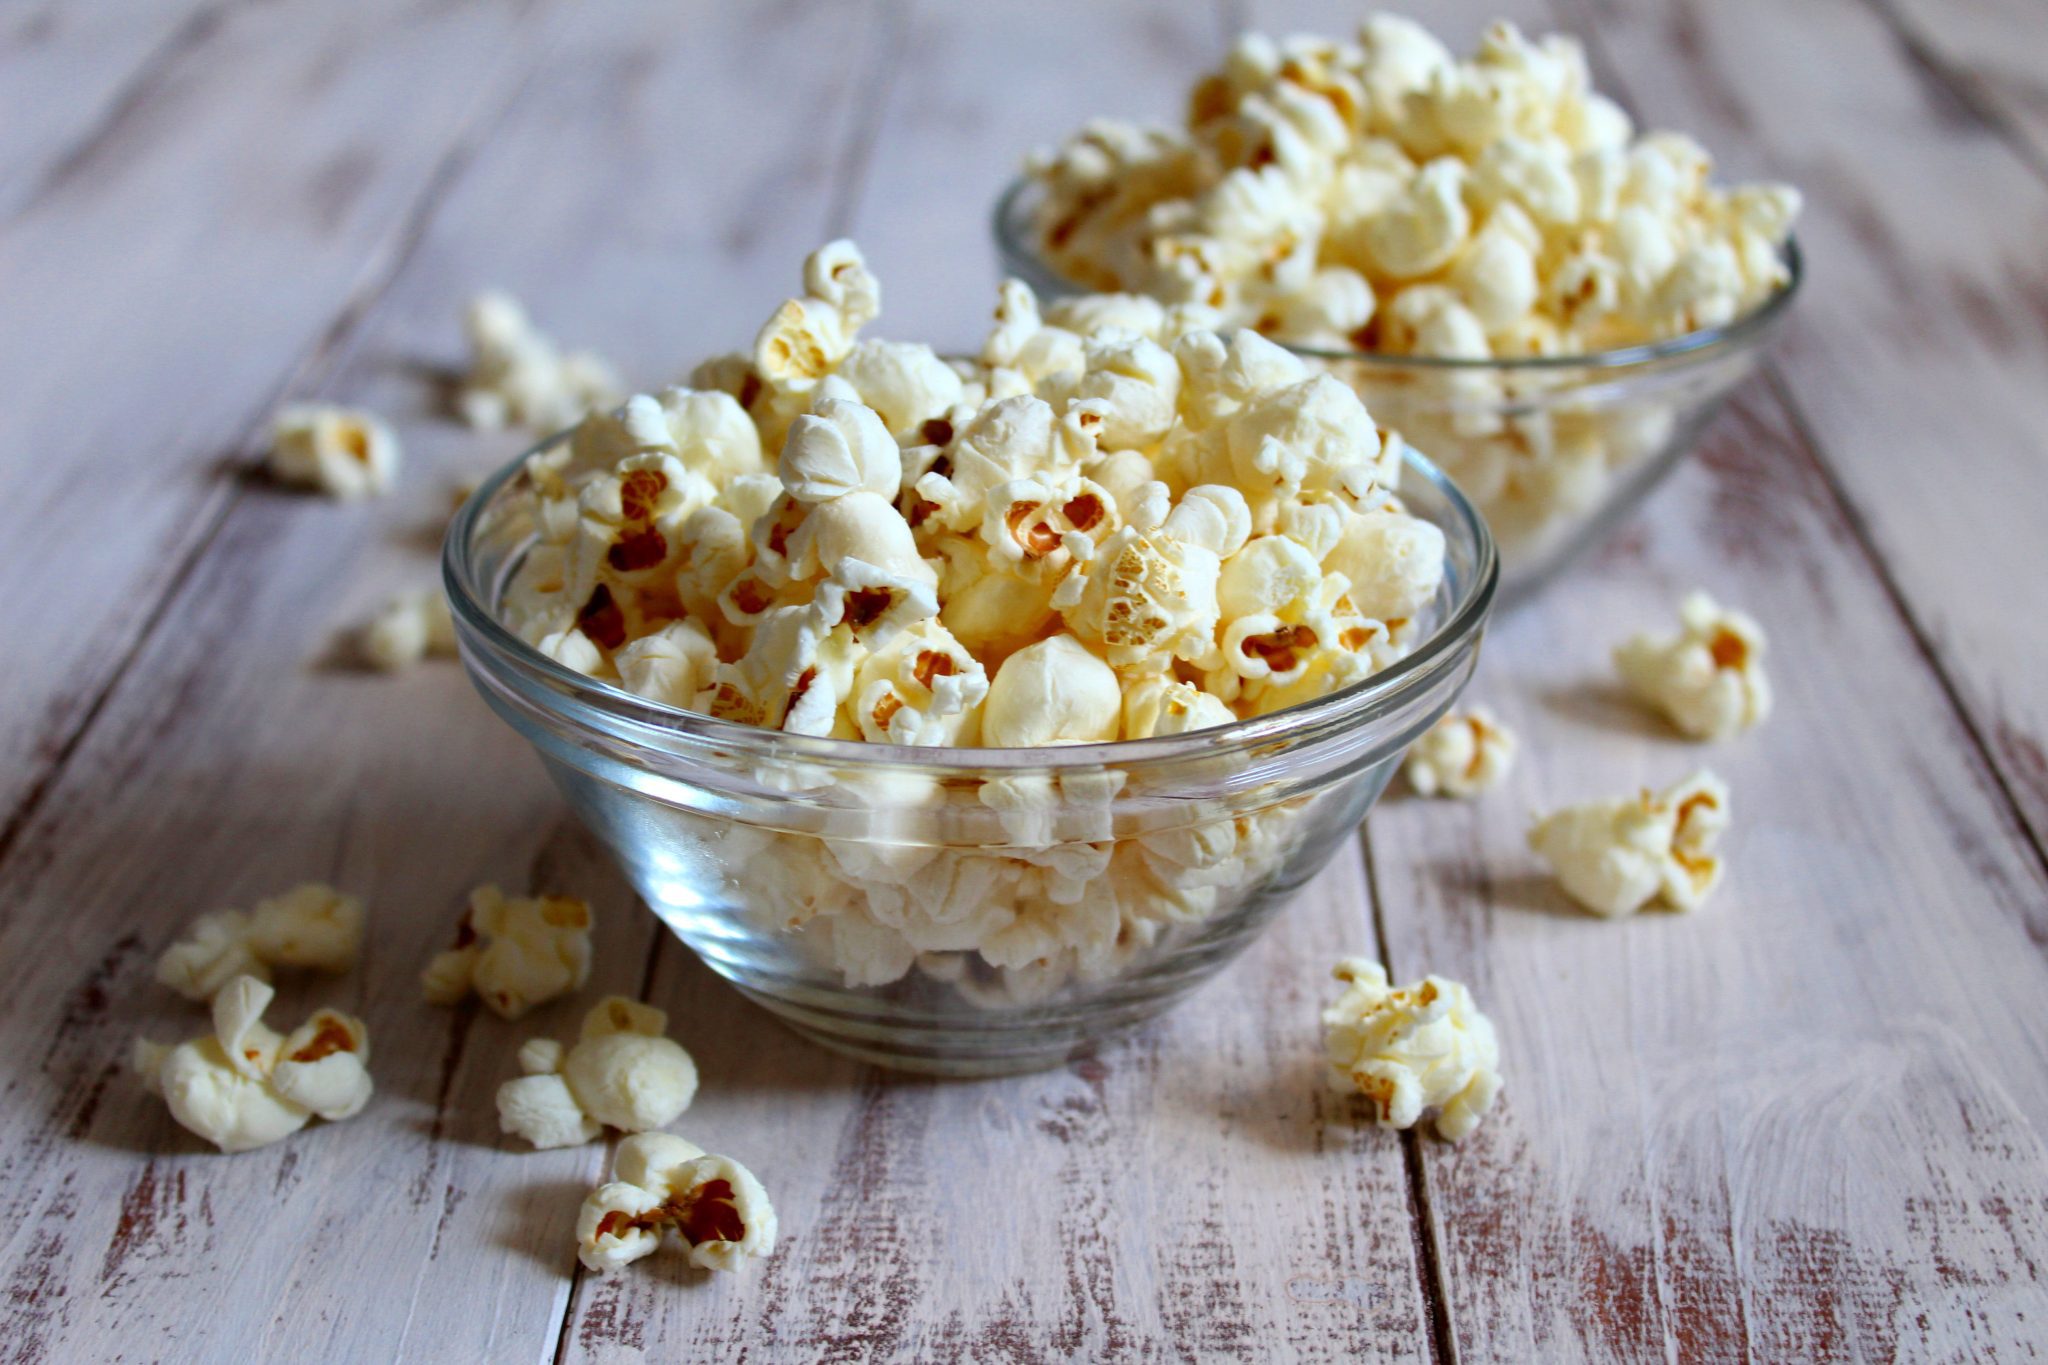 popcorn is one of many options for healthy snacks